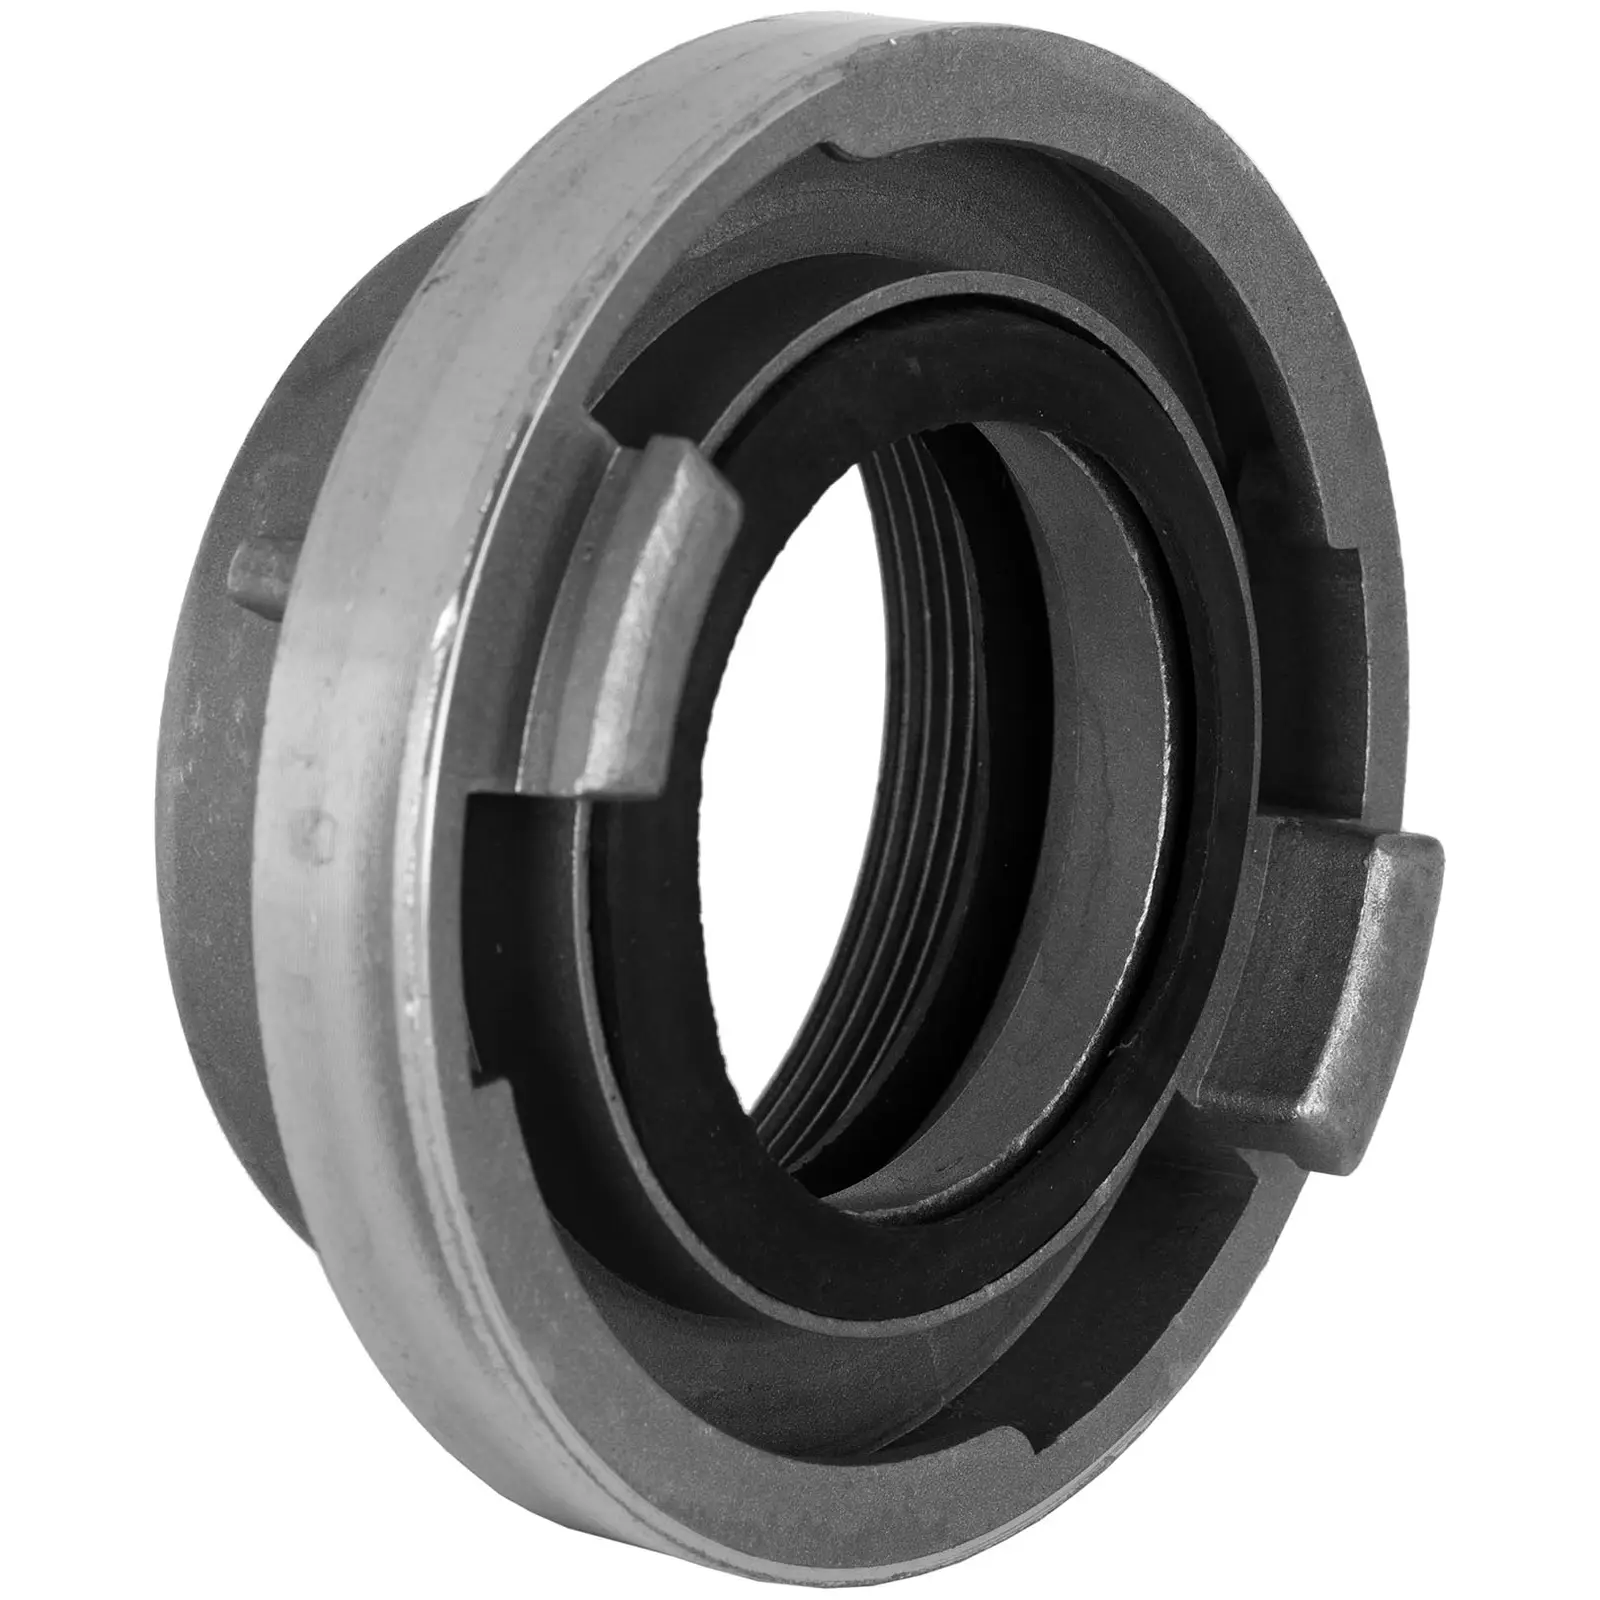 Fixed coupling with internal thread - hose size 3 "- Storz